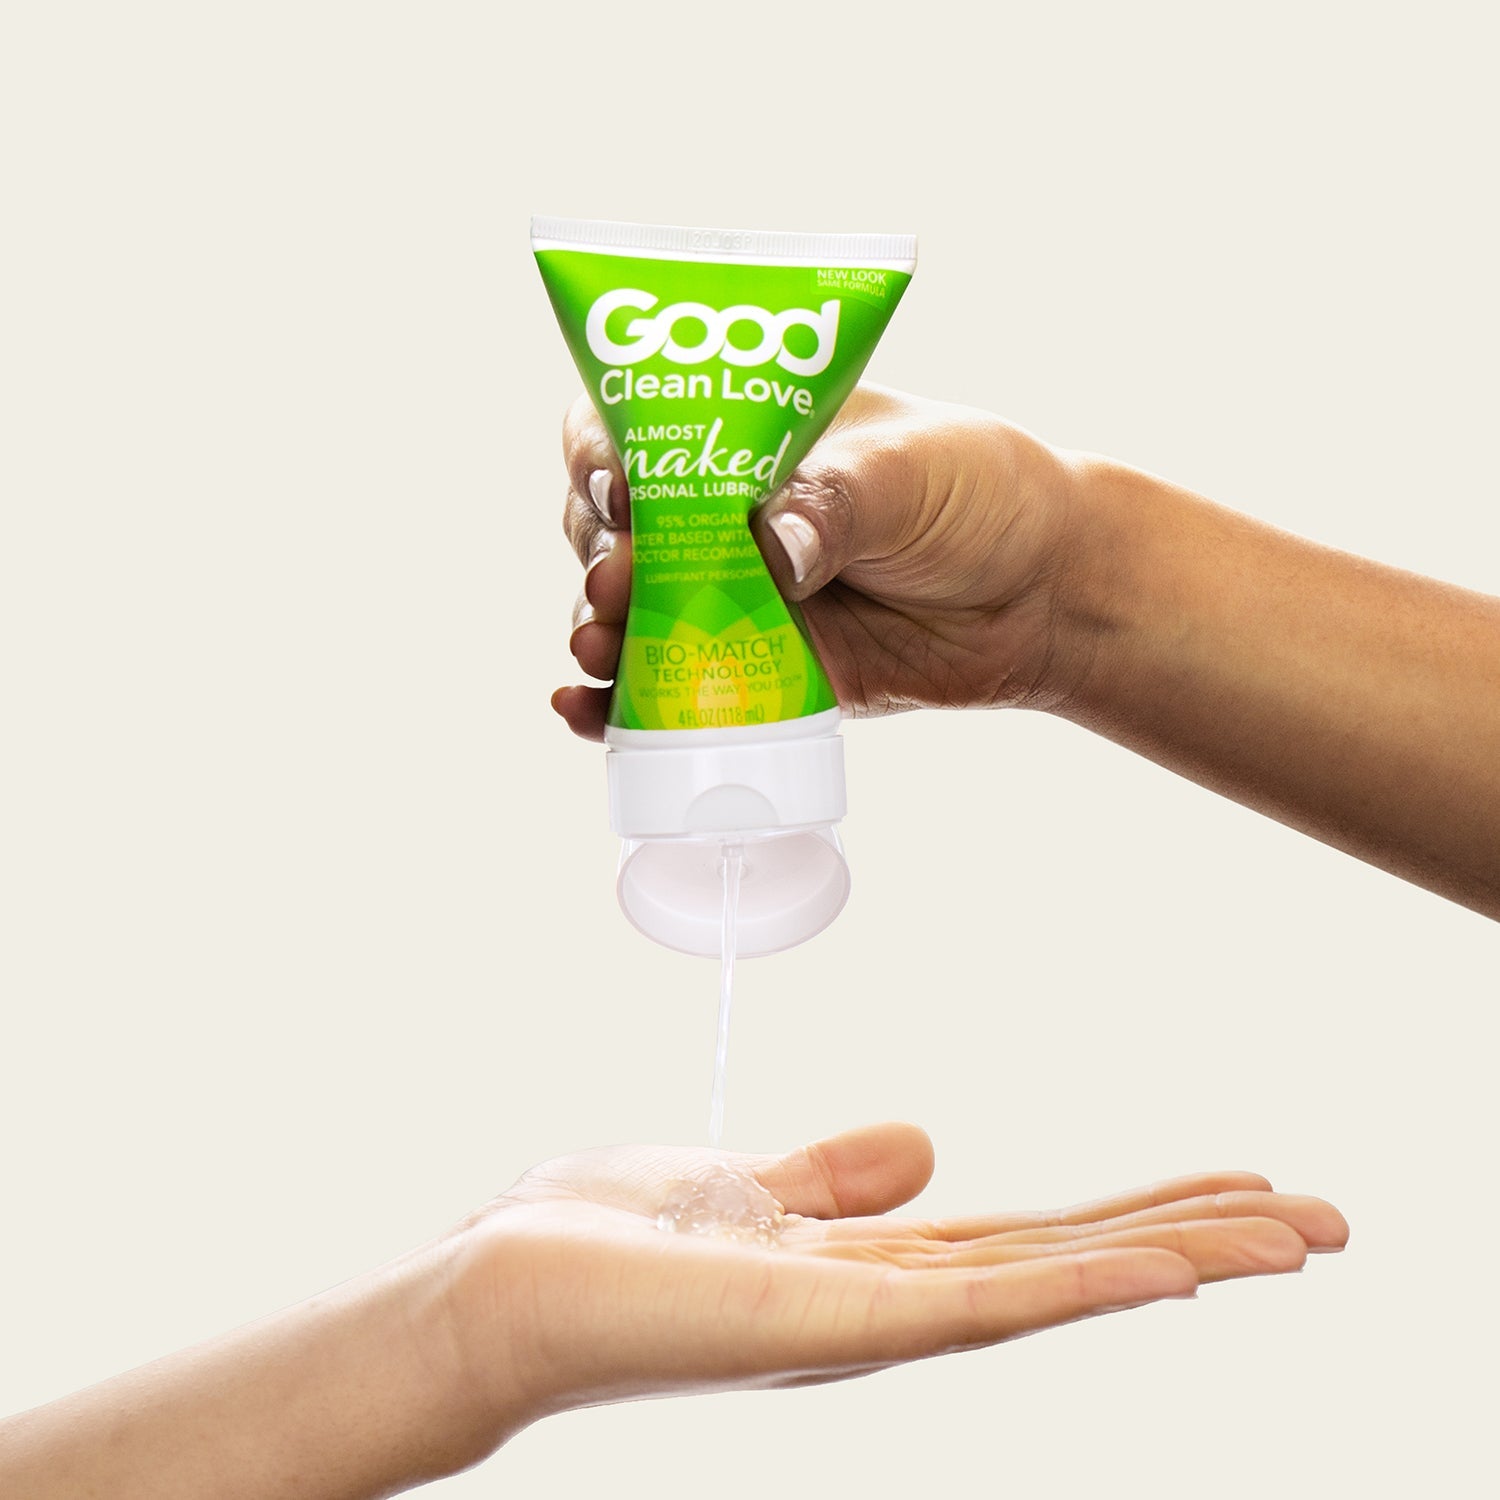 Products - Good Clean Love